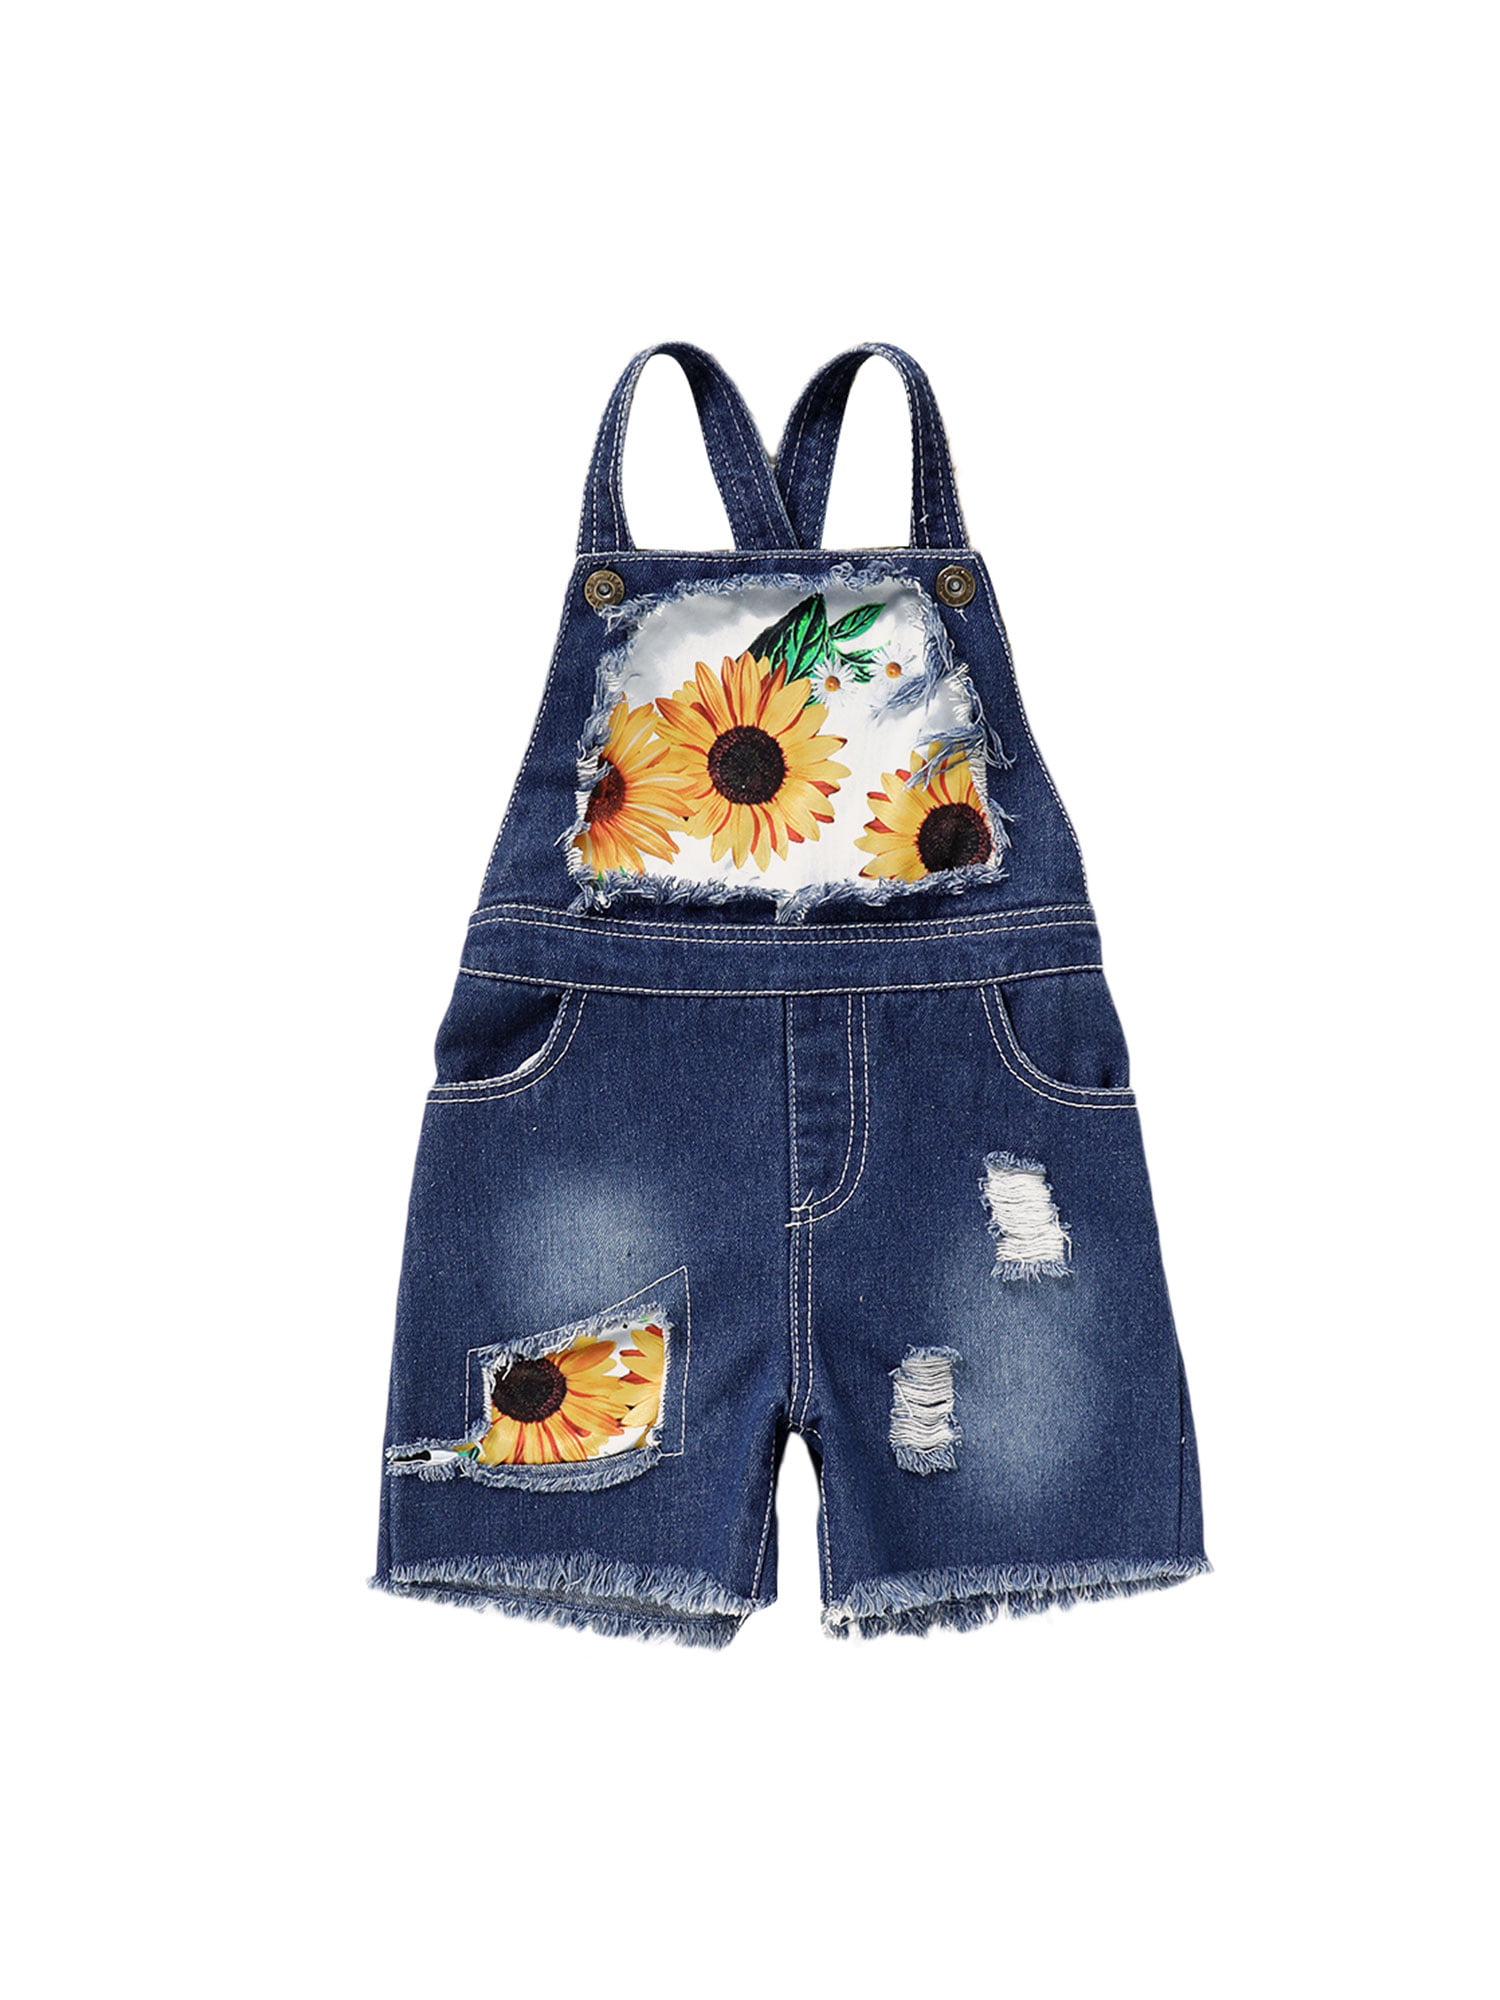 N /C Toddler Baby Girl Sunflower Overall Shorts with Pocket Summer Backless Bib Suspender One Piece Trousers 